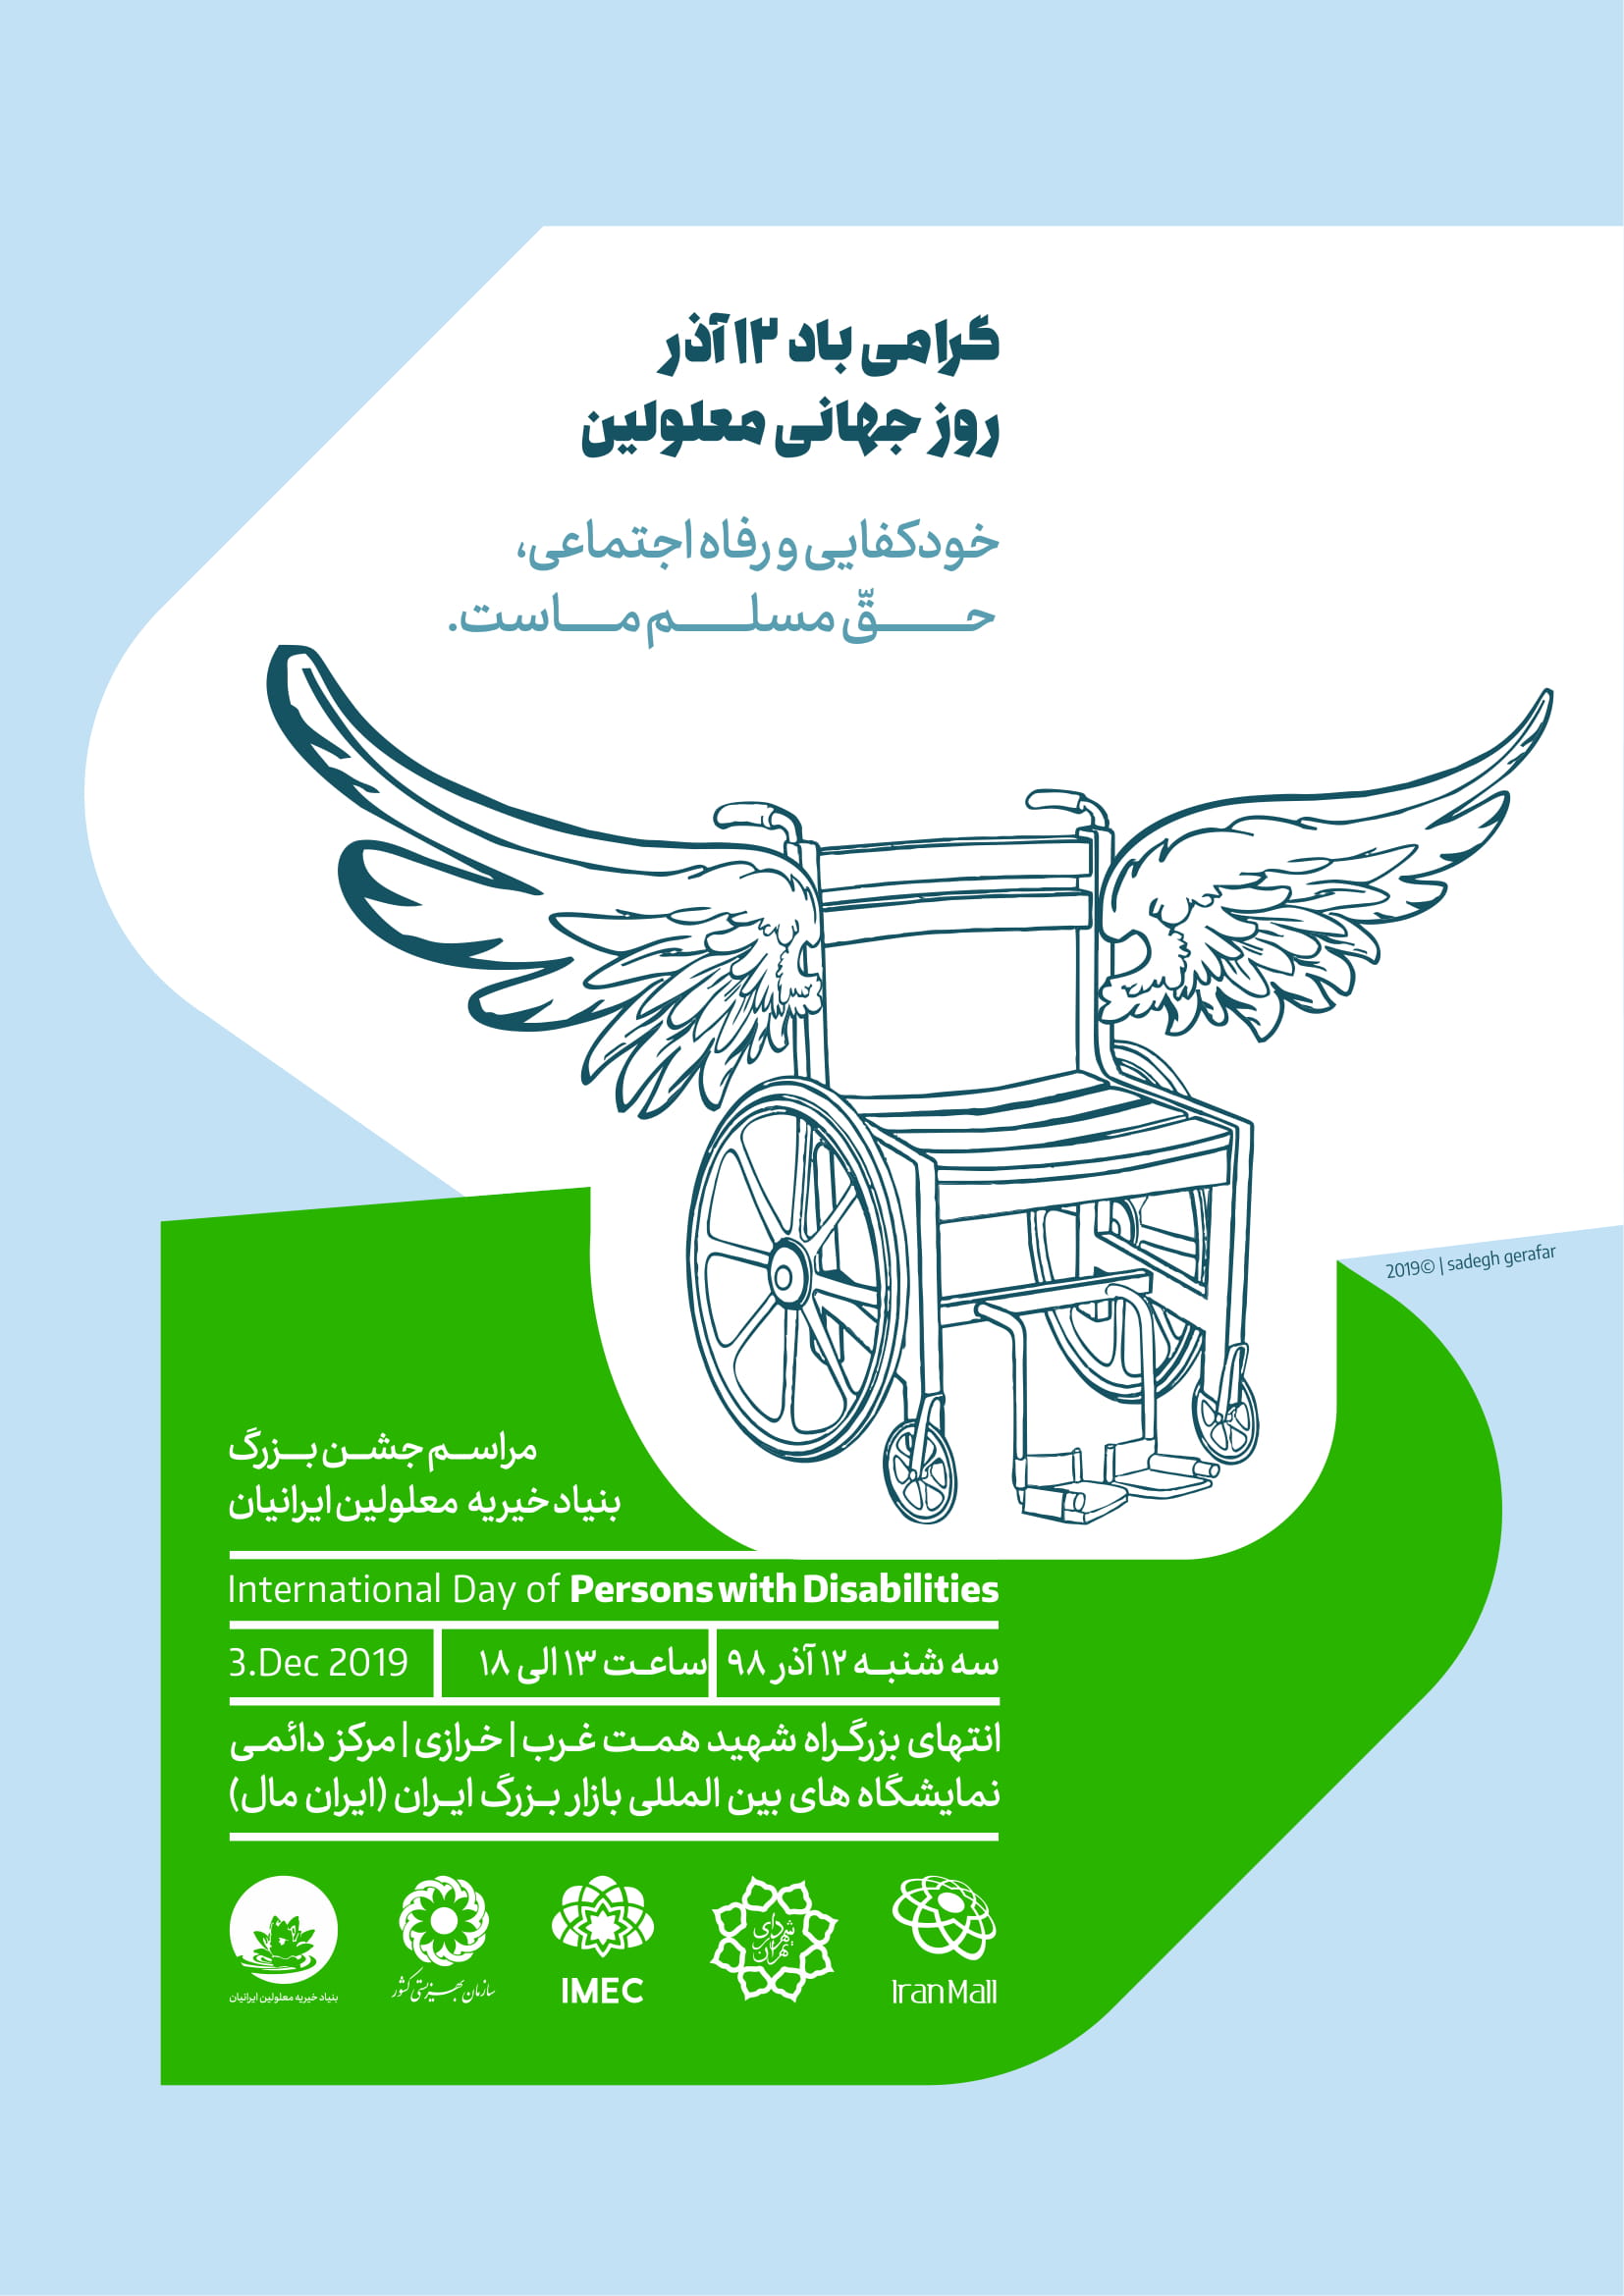 The commemoration ceremony of the International Day of Disabled Persons